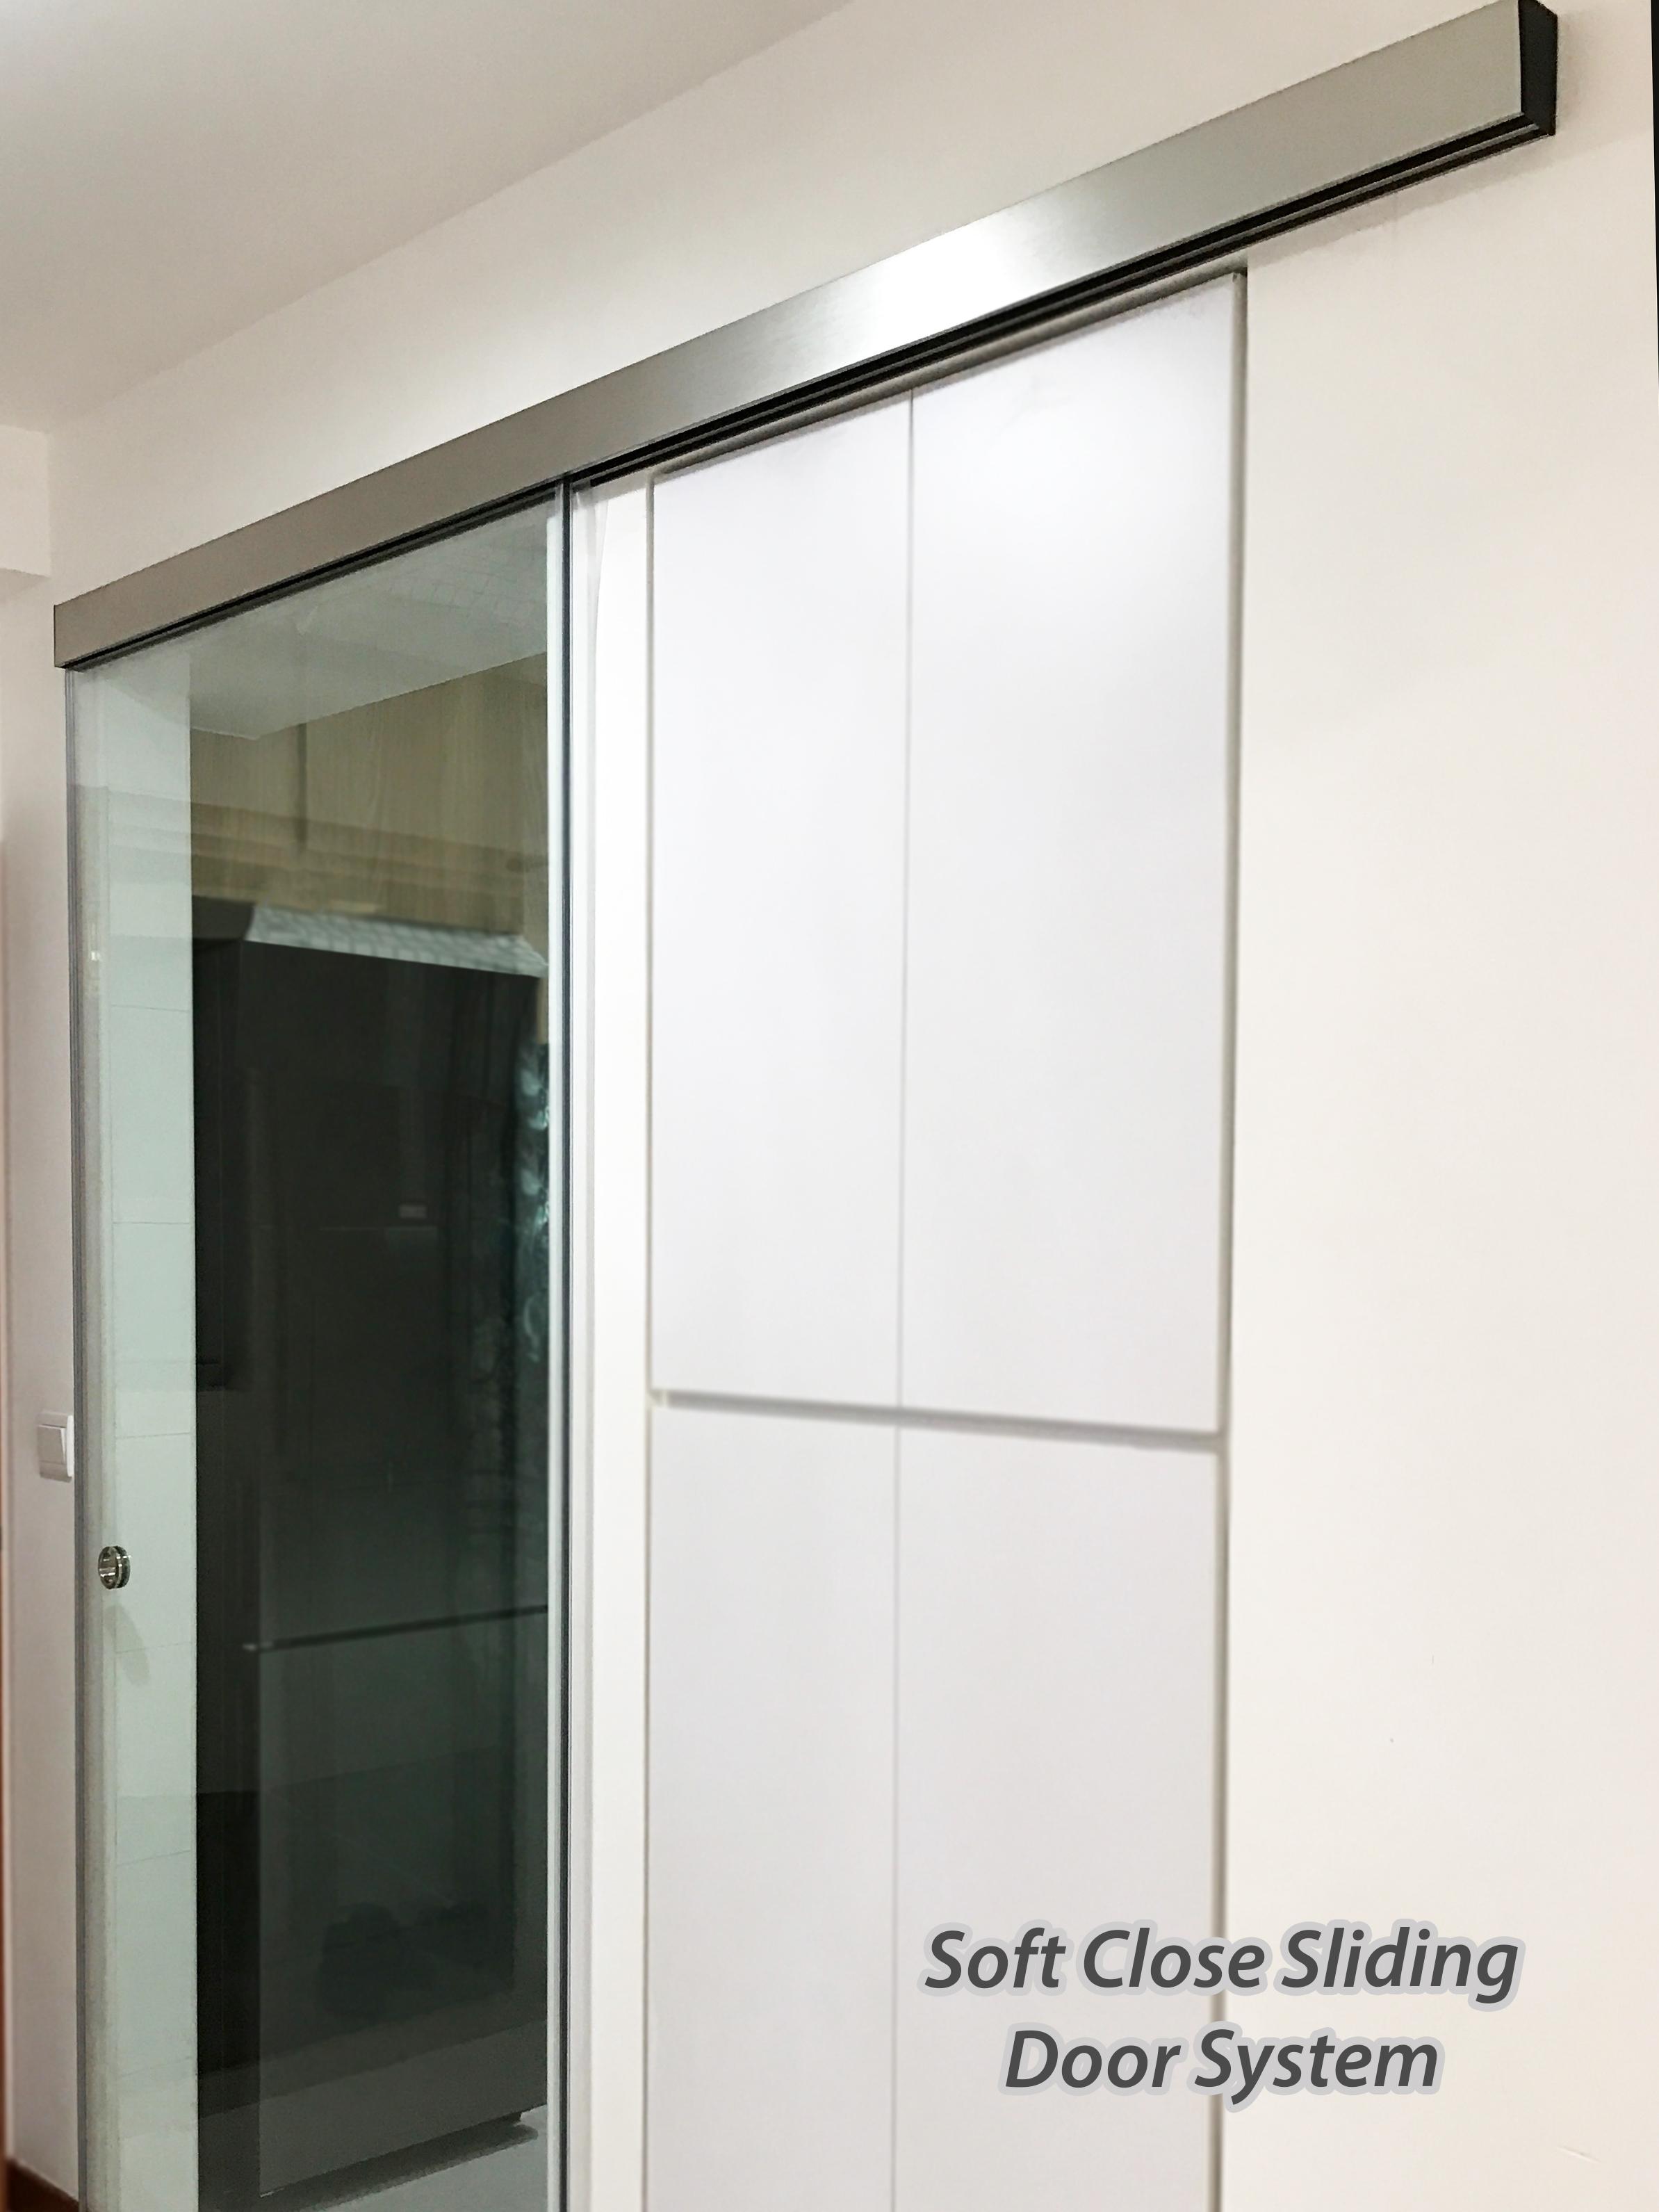 222 Sliding Door System Soft Closing Accessories Only Lazada Singapore